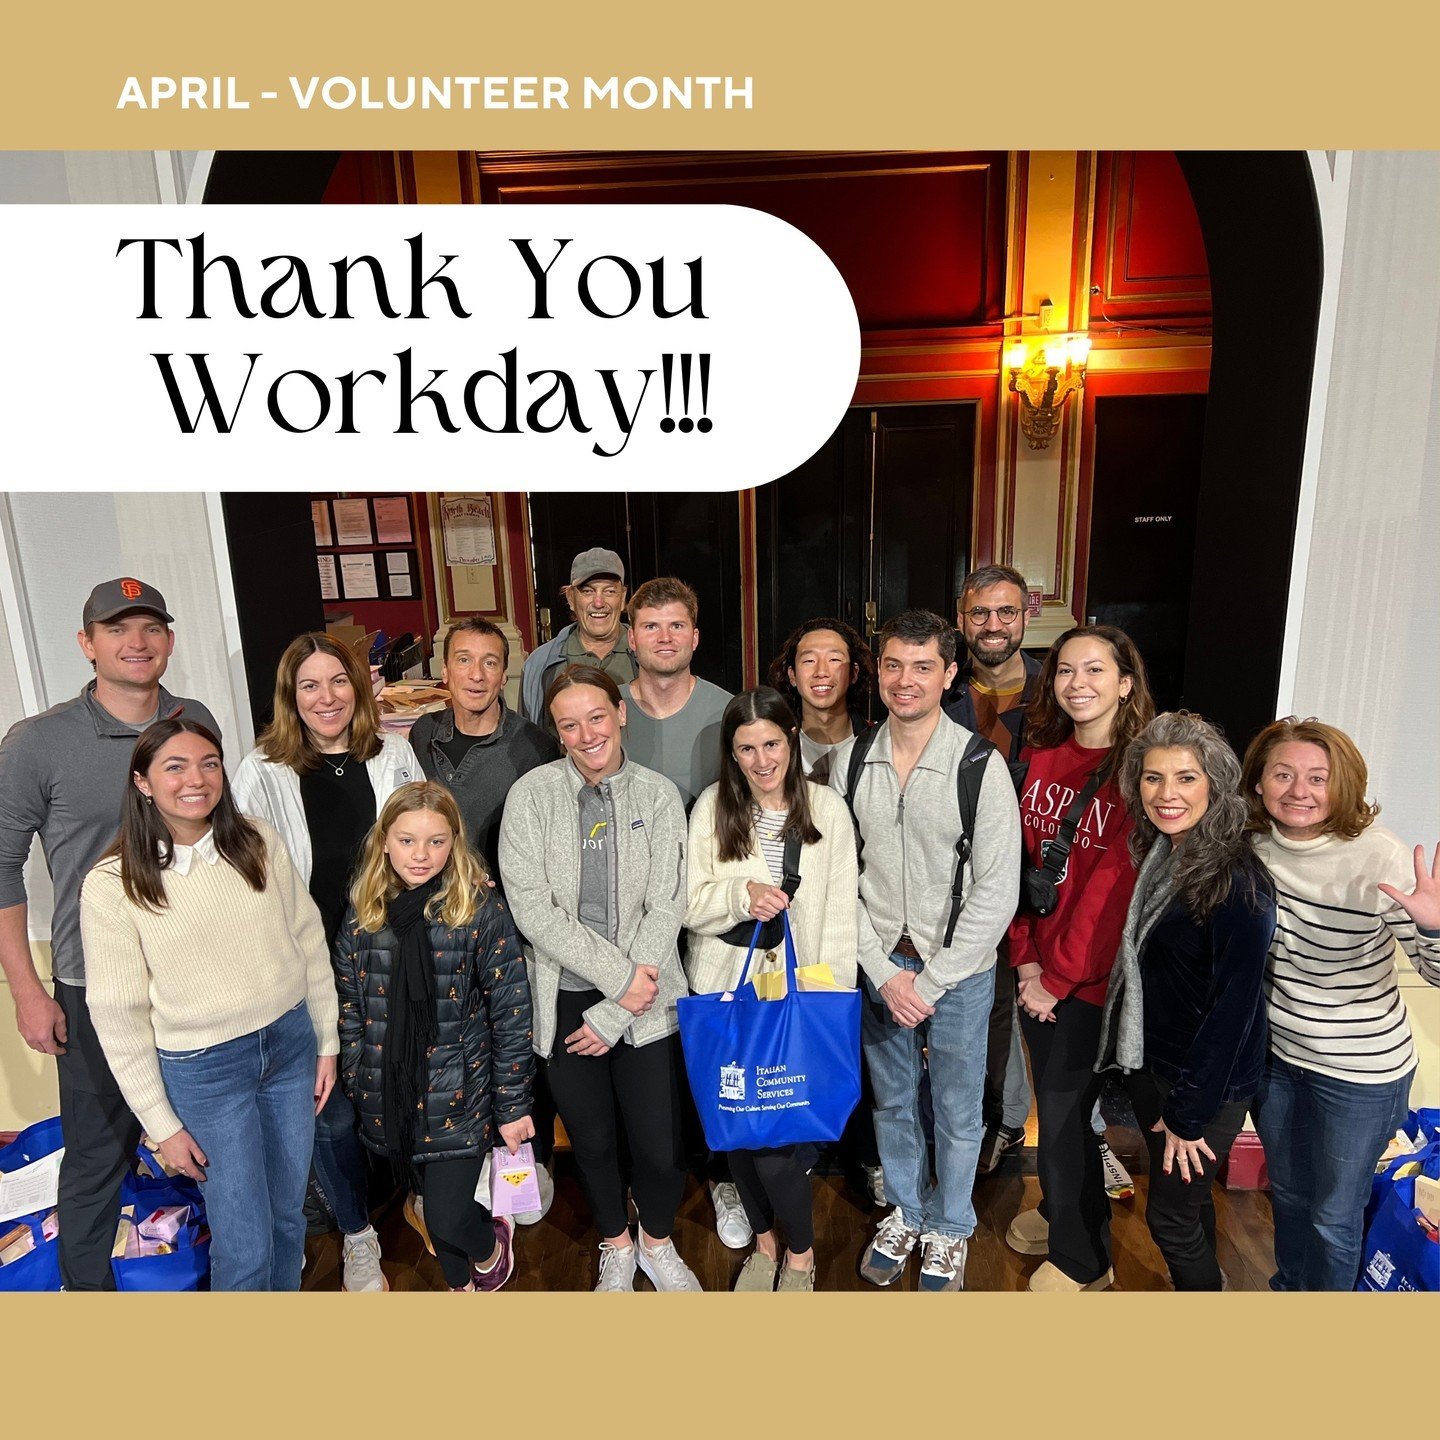 🌟 We extend a heartfelt thank you to Workday! 🌟

During Volunteer Month, we celebrated our precious volunteers but today we would like to focus our thanks on the incredible commitment of Workday employees, whose passion and dedication have made a p